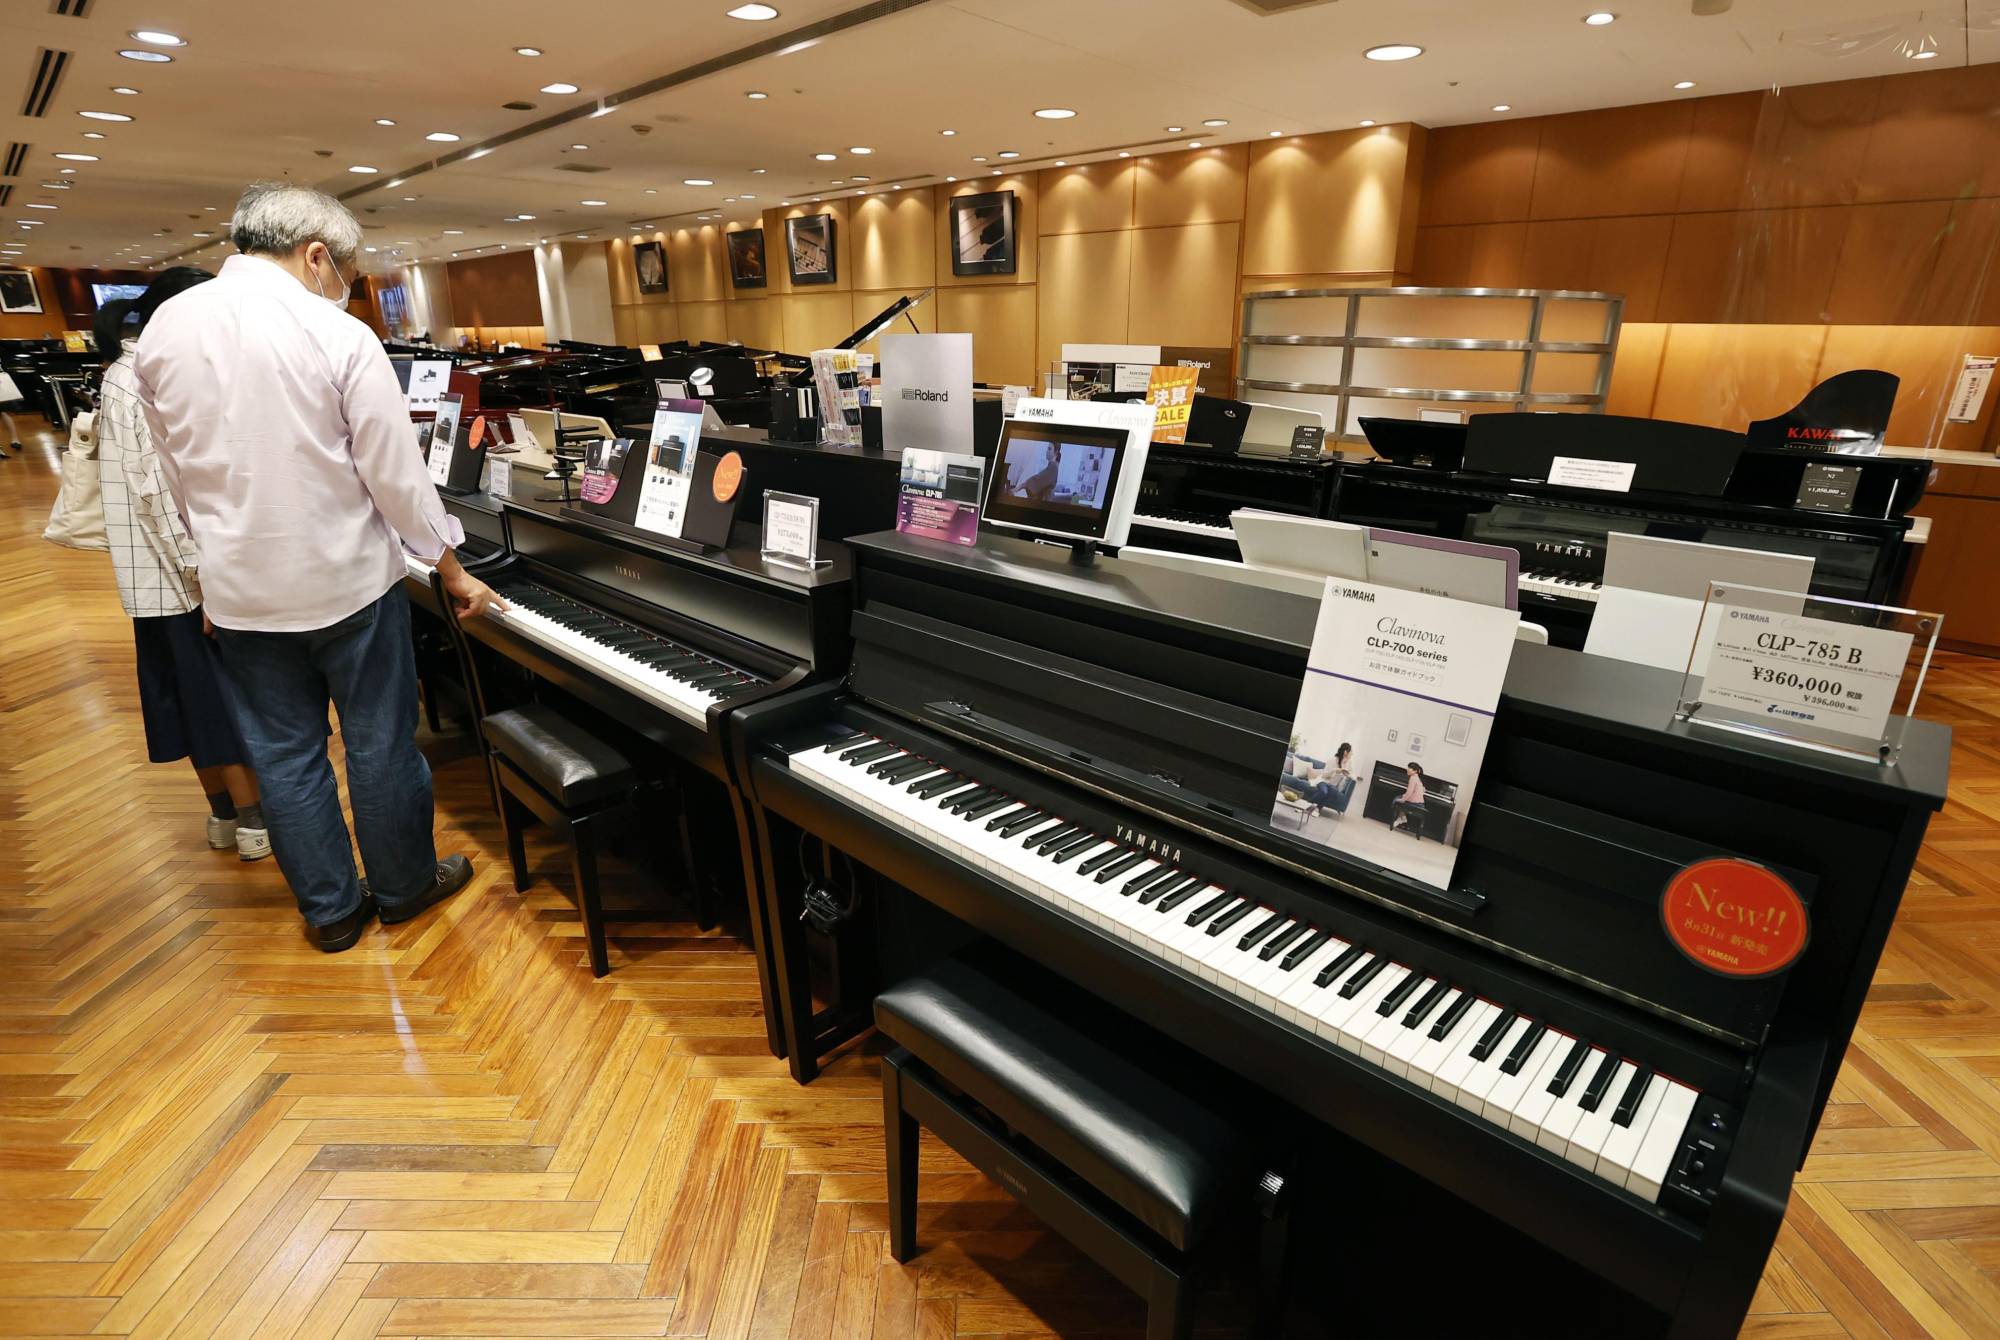 Sales of electric pianos have increased 1.4 times compared with last year, with more people taking up instruments during the coronavirus pandemic. | KYODO